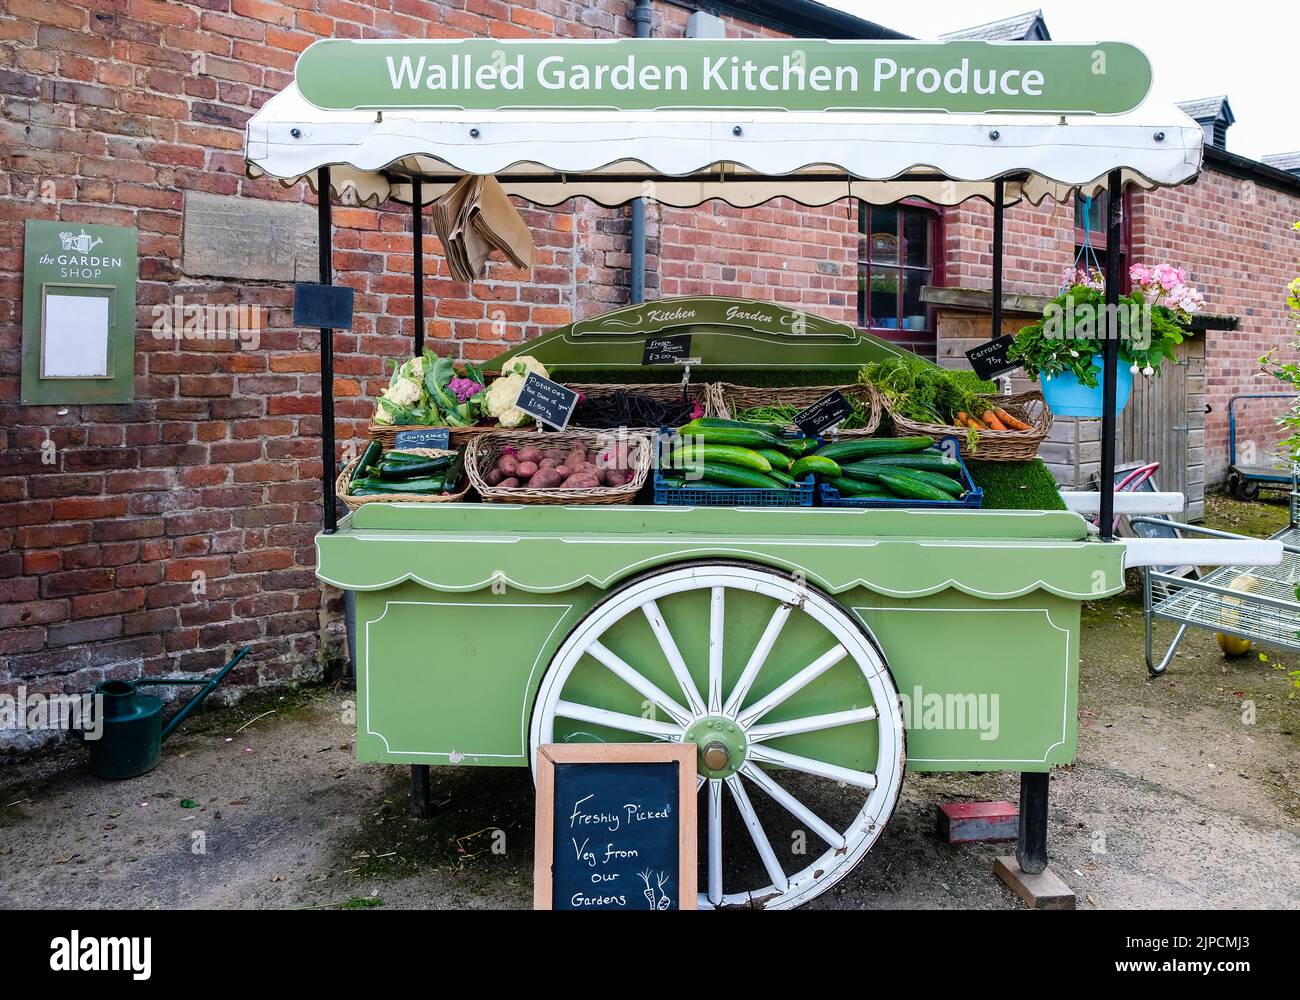 Freshly picked vegetables for sale outdoors on green wheel barrow,Walled Garden Kitchen Produce,Cauliflower,Courgettes,Carrots,Potatoes,Green Beans Stock Photo